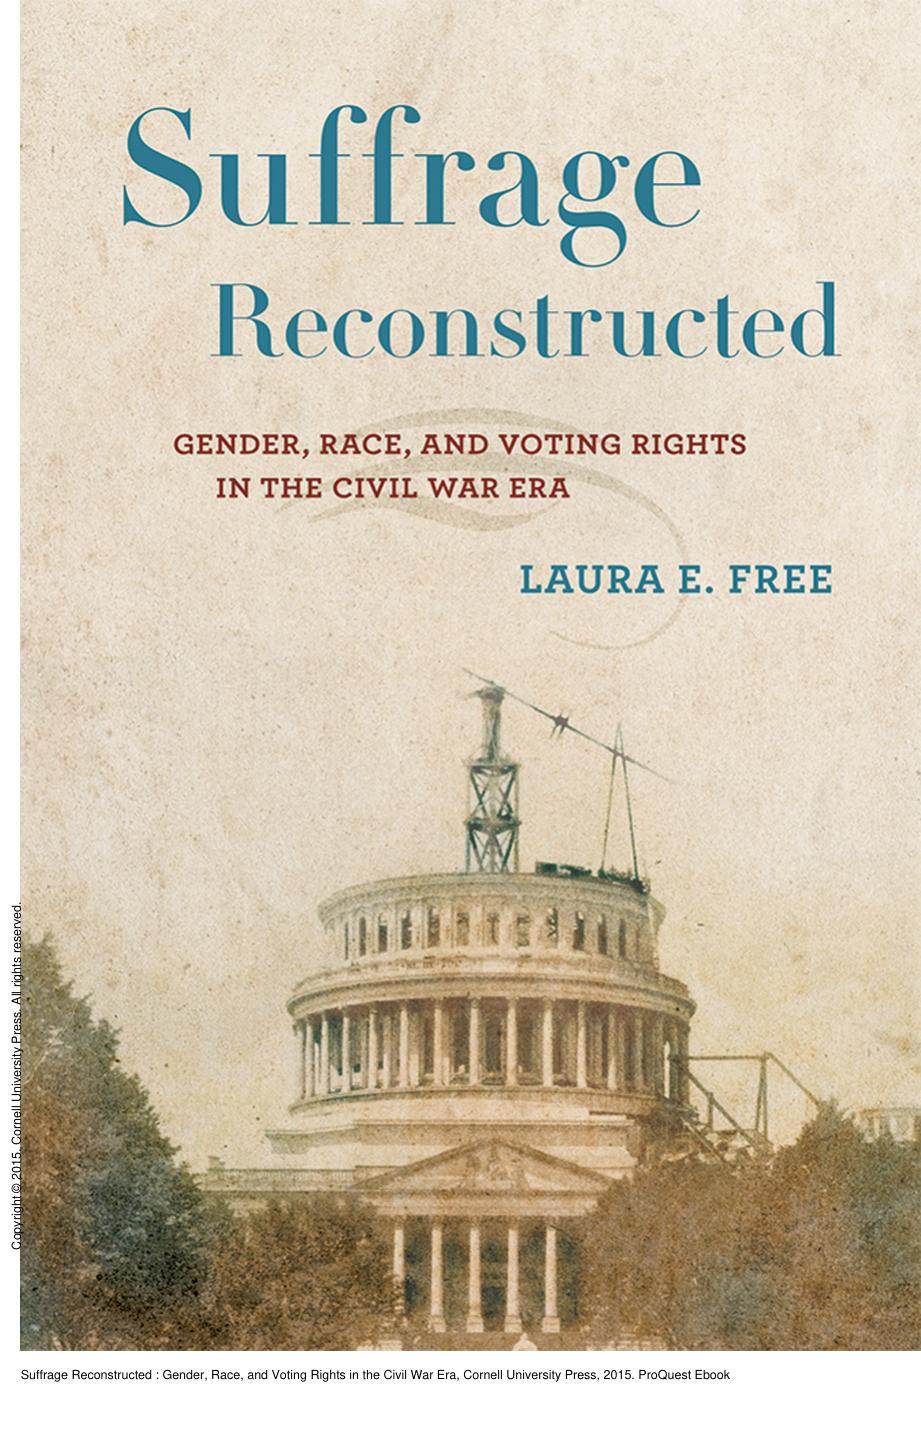 Suffrage Reconstructed : Gender, Race, and Voting Rights in the Civil War Era by Laura E. Free